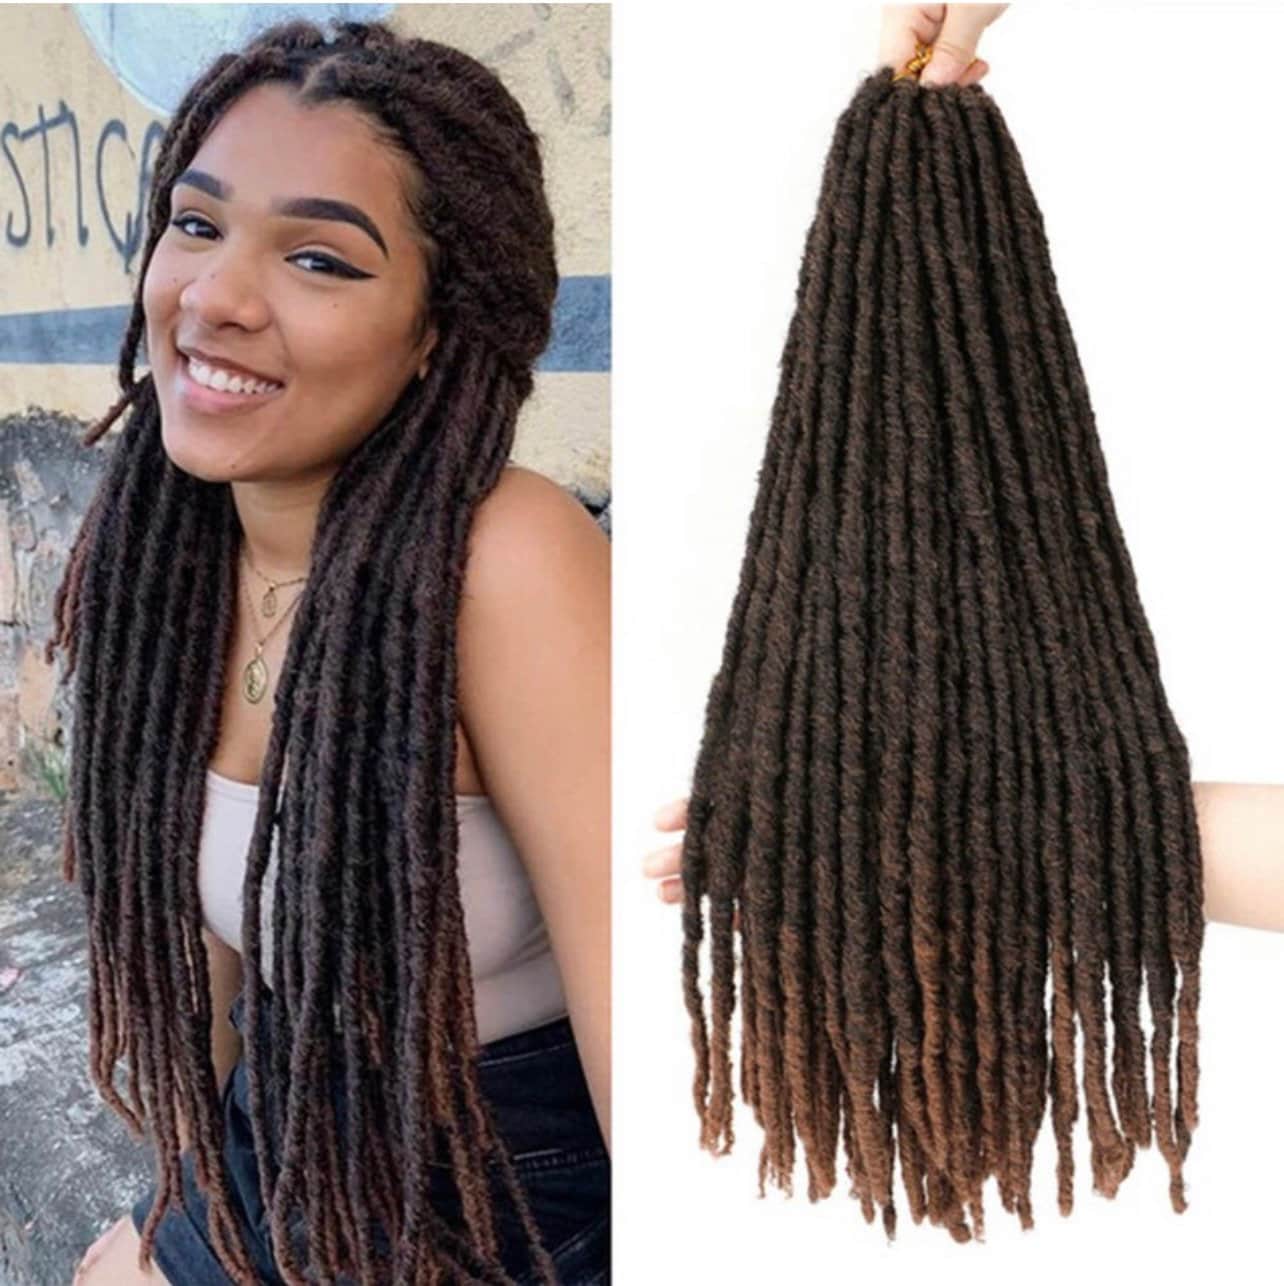 18 Inch Fake Hair Sister Locs Faux Locs Crochet Hair Extensions For Black  Women Synthetic Faux